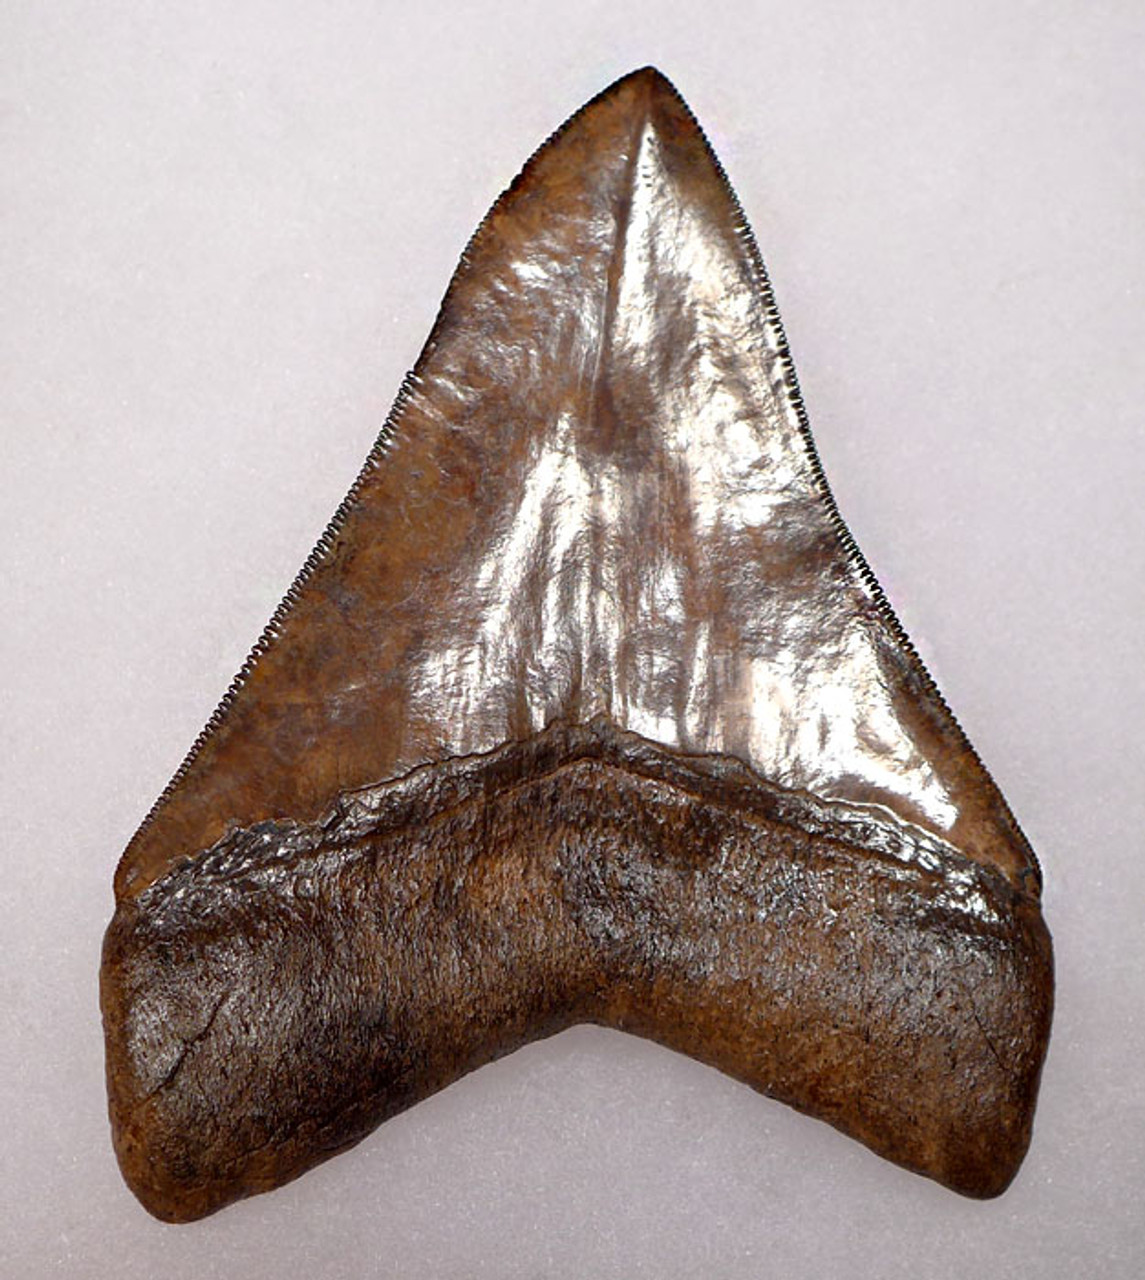 SH6-326 - COLLECTOR GRADE 4.4 INCH MEGALODON SHARK TOOTH WITH STUNNING MOTTLED COPPER ENAMEL